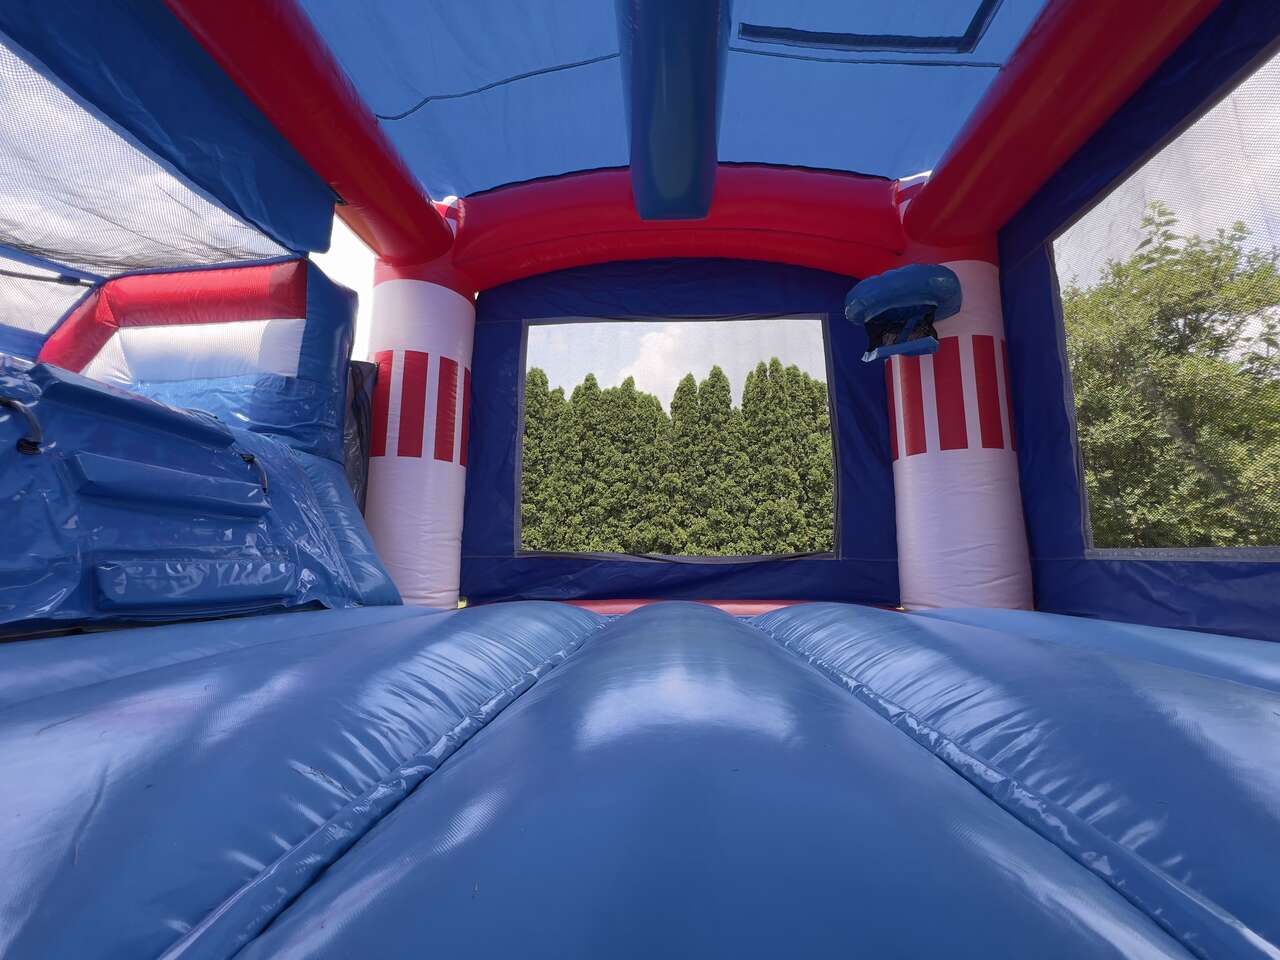 Bounce house rentals by Fun Bounces Rental in Braidwood Il 60408